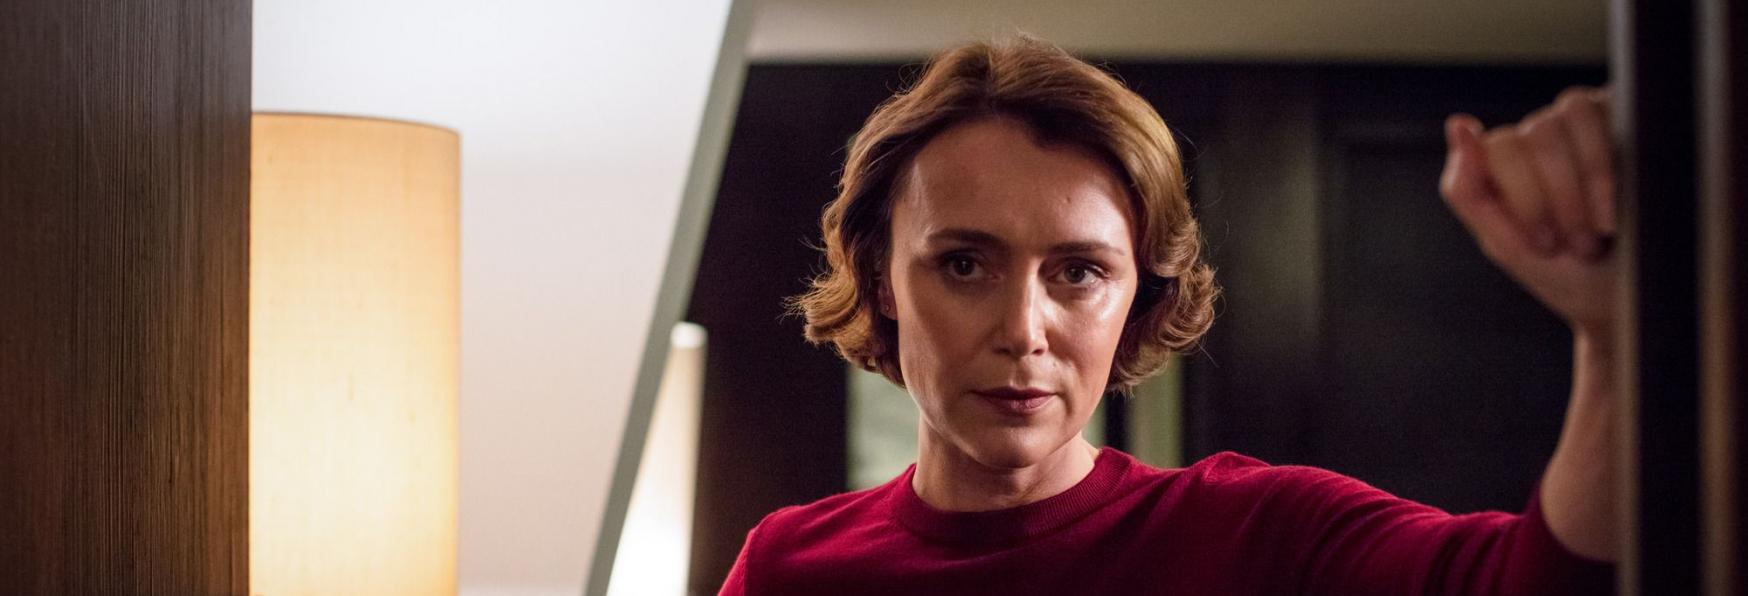 Orphan Black: Echoes - Keeley Hawes nel Cast della Serie Spin-off